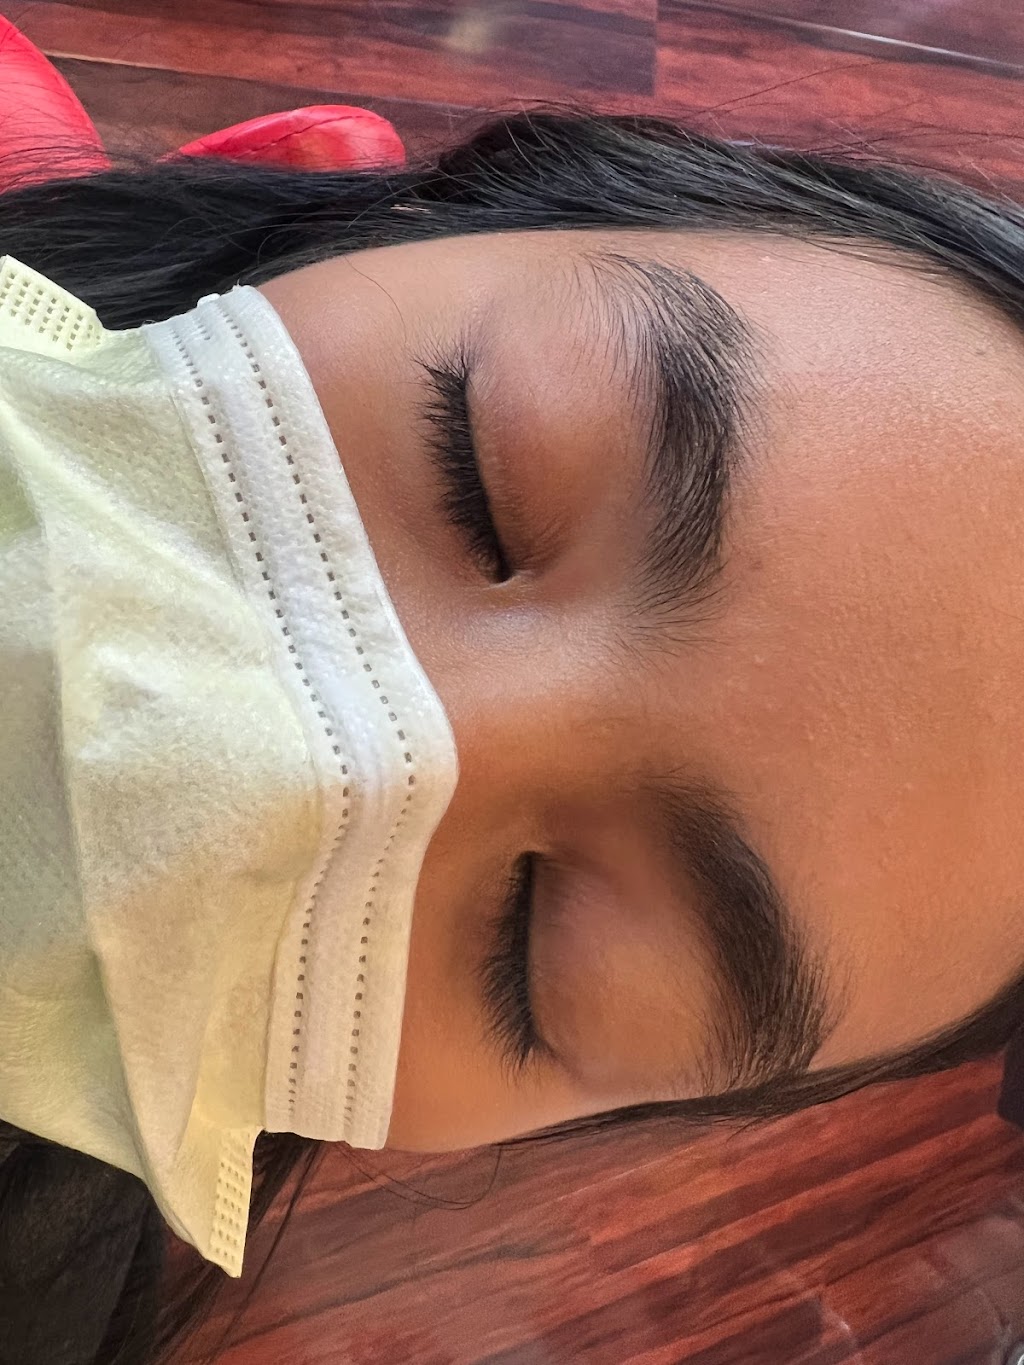 Arch Threading & Wax Center | 4916 Paseo Padre Pkwy, Fremont, CA 94555 | Phone: (510) 488-1188